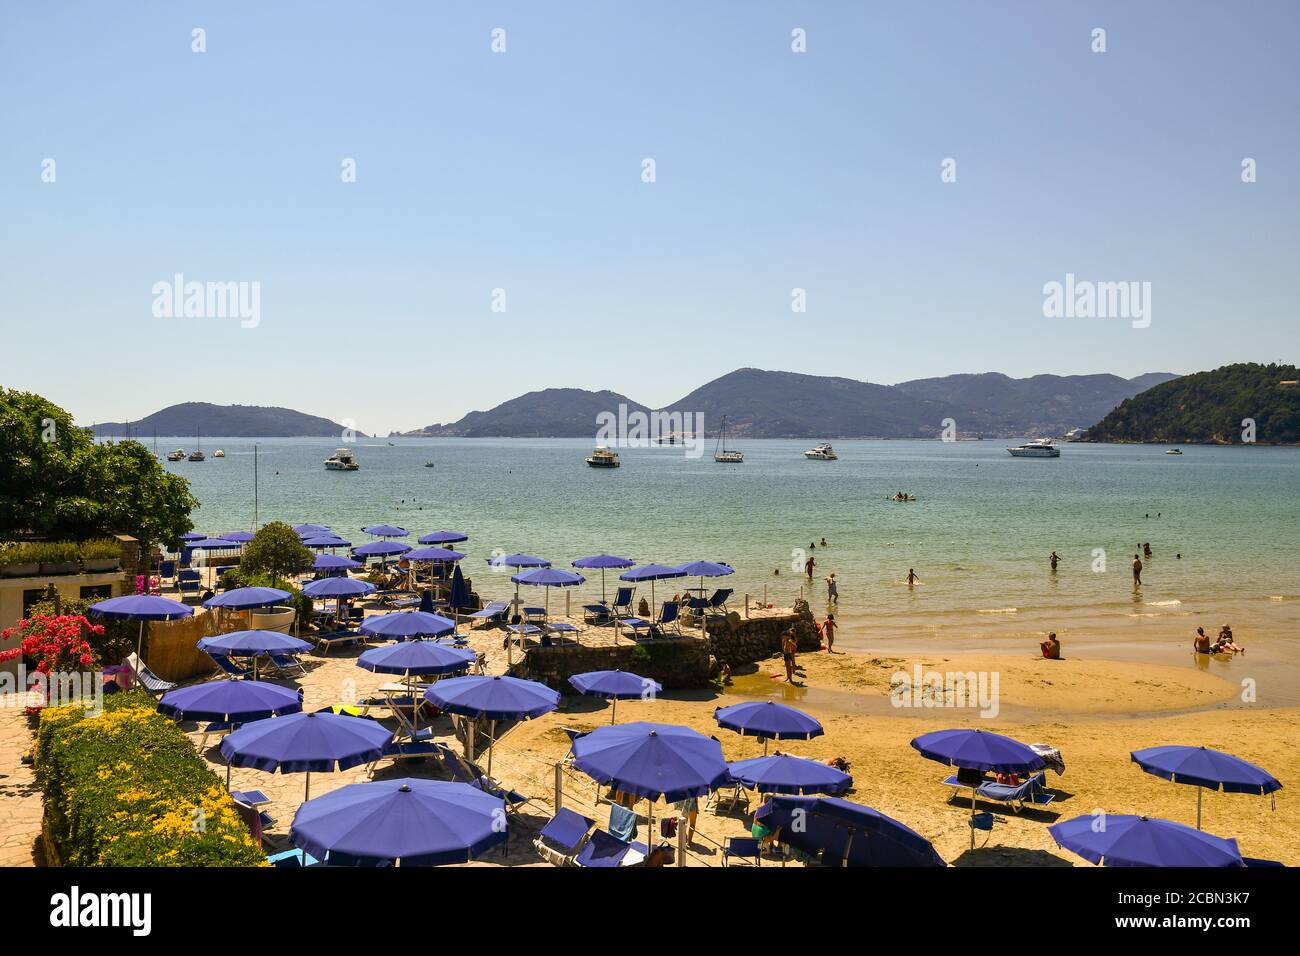 Scenic view of the Gulf of Poets from a sandy beach with sun umbrellas and people swimming and sunbathing in summer, Lerici, La Spezia, Liguria, Italy Stock Photo